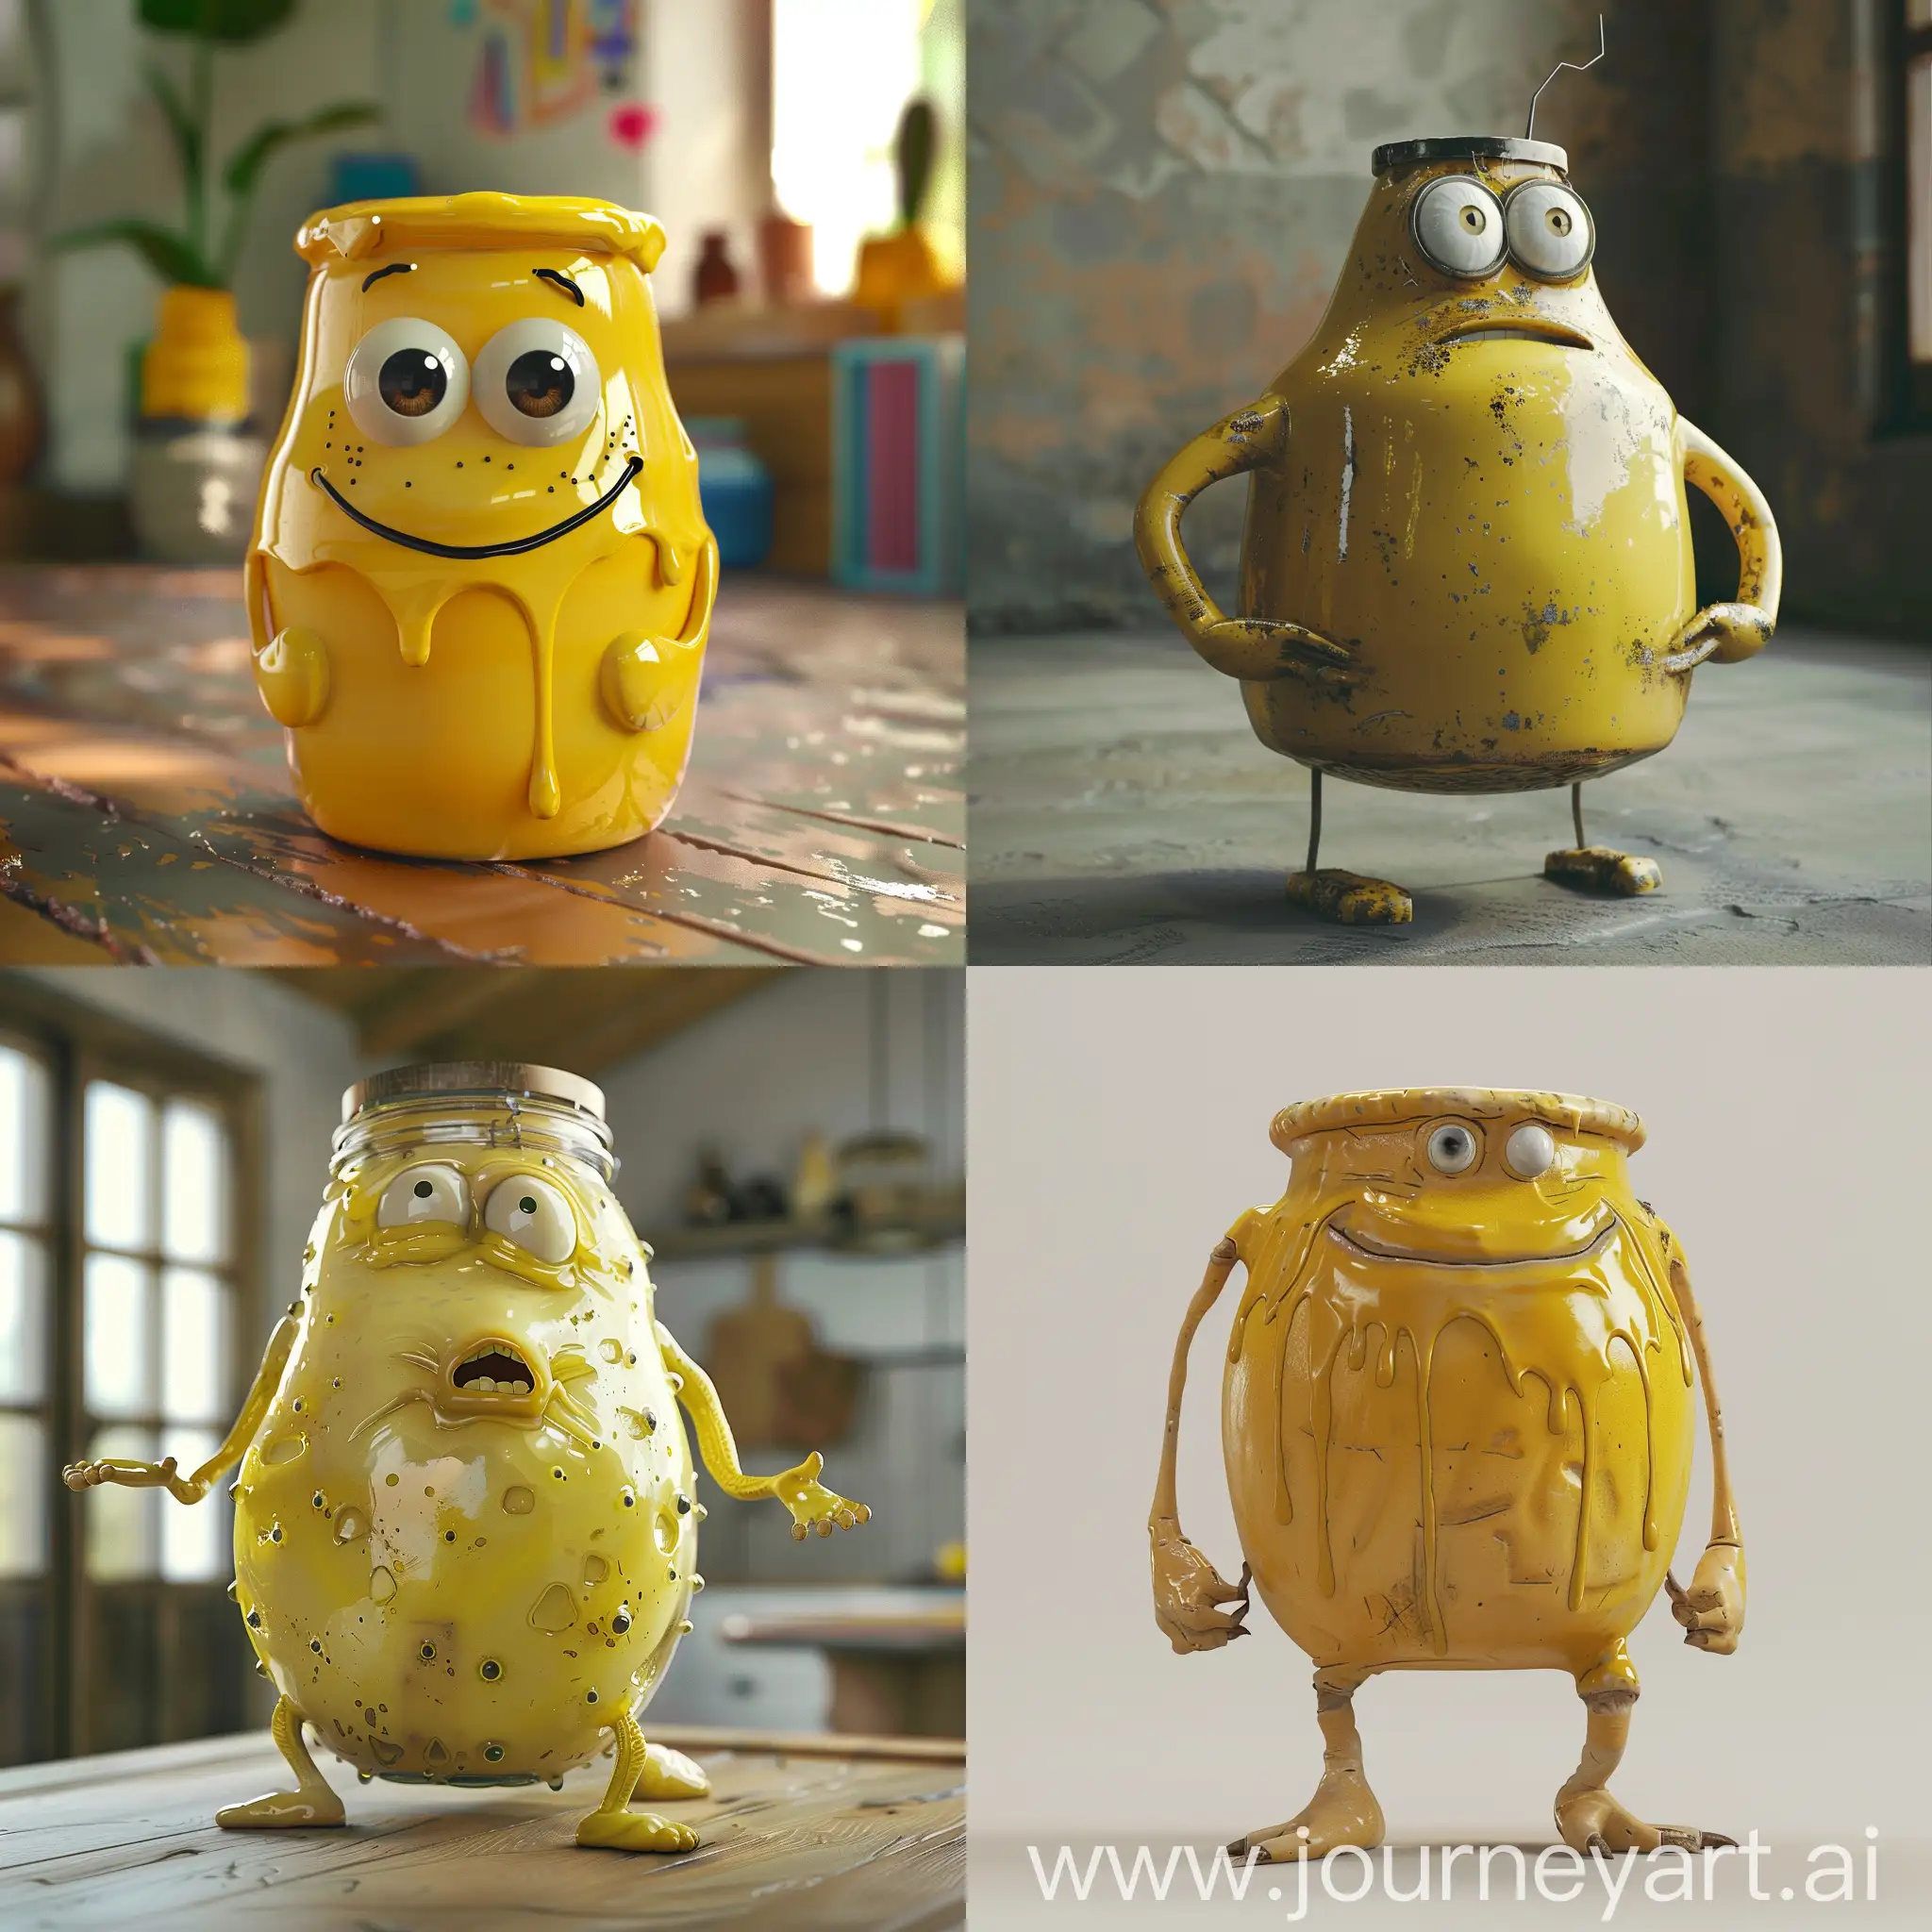 Animated-3D-Mustard-Jar-Character-with-Wrinkled-Arms-and-Legs